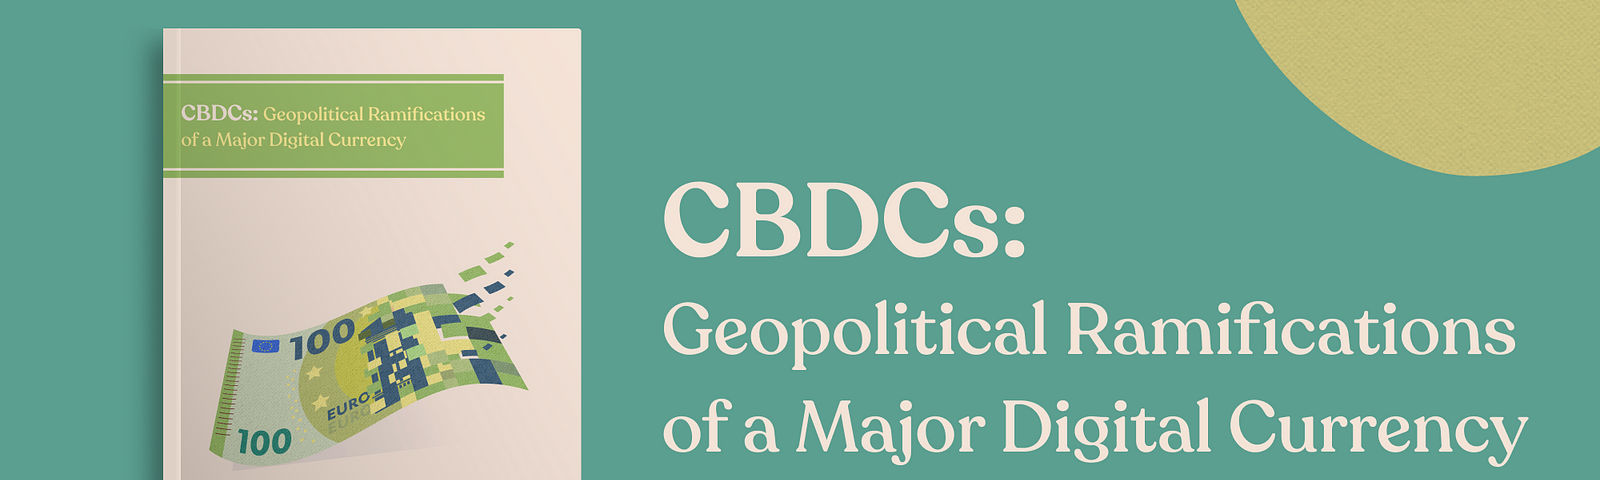 Book with title: ‘CBDCs: Geopolitical Ramifications of a Major Digital Currency’ and a 100 euro bill over a green background.